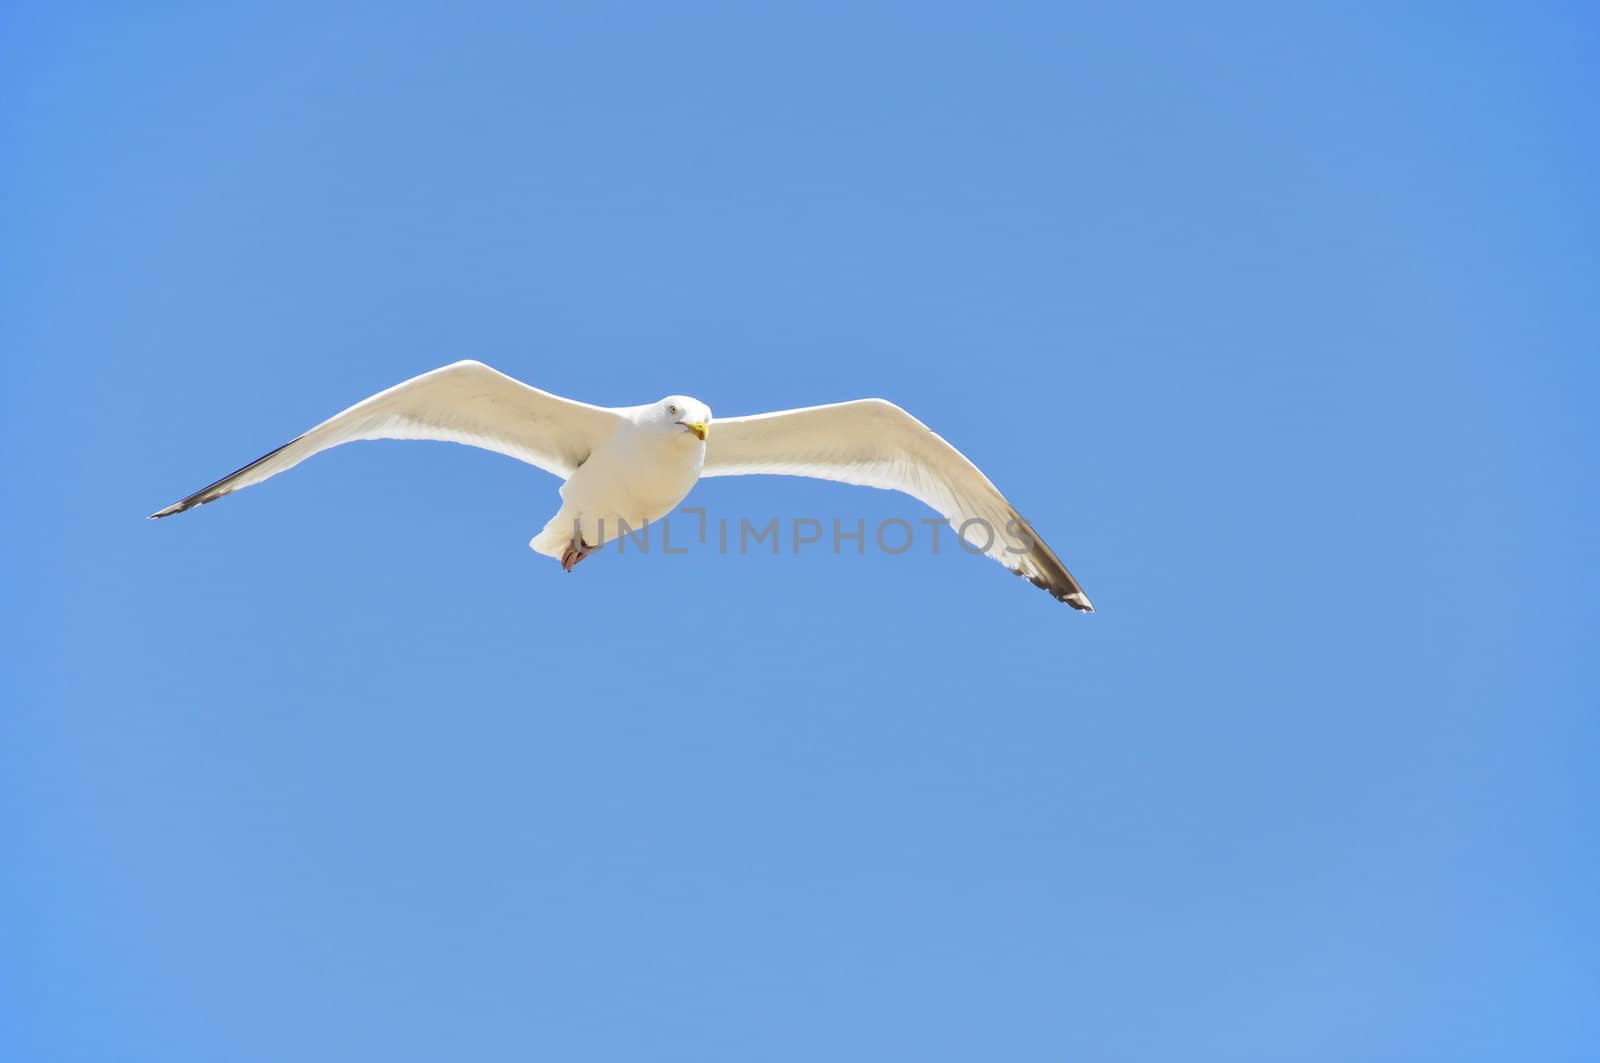 A seagull flying in a blue sky